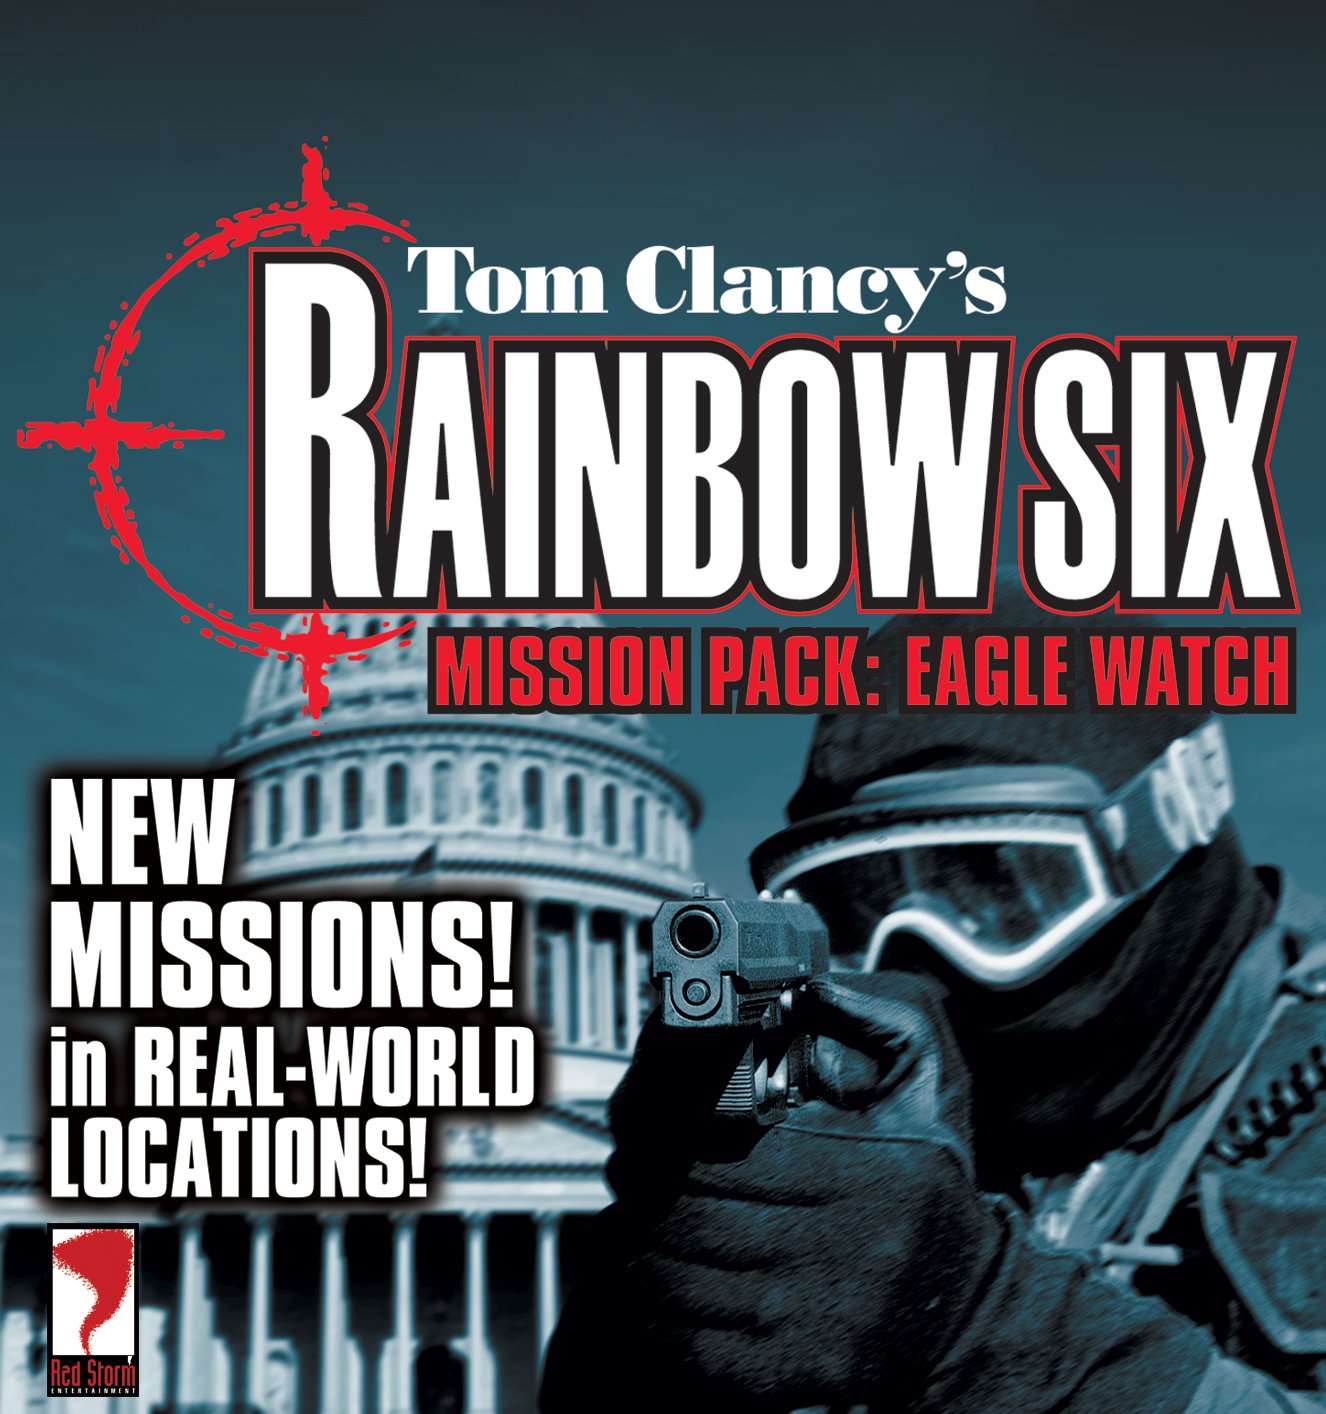 Image of Tom Clancy's Rainbow Six Mission Pack: Eagle Watch